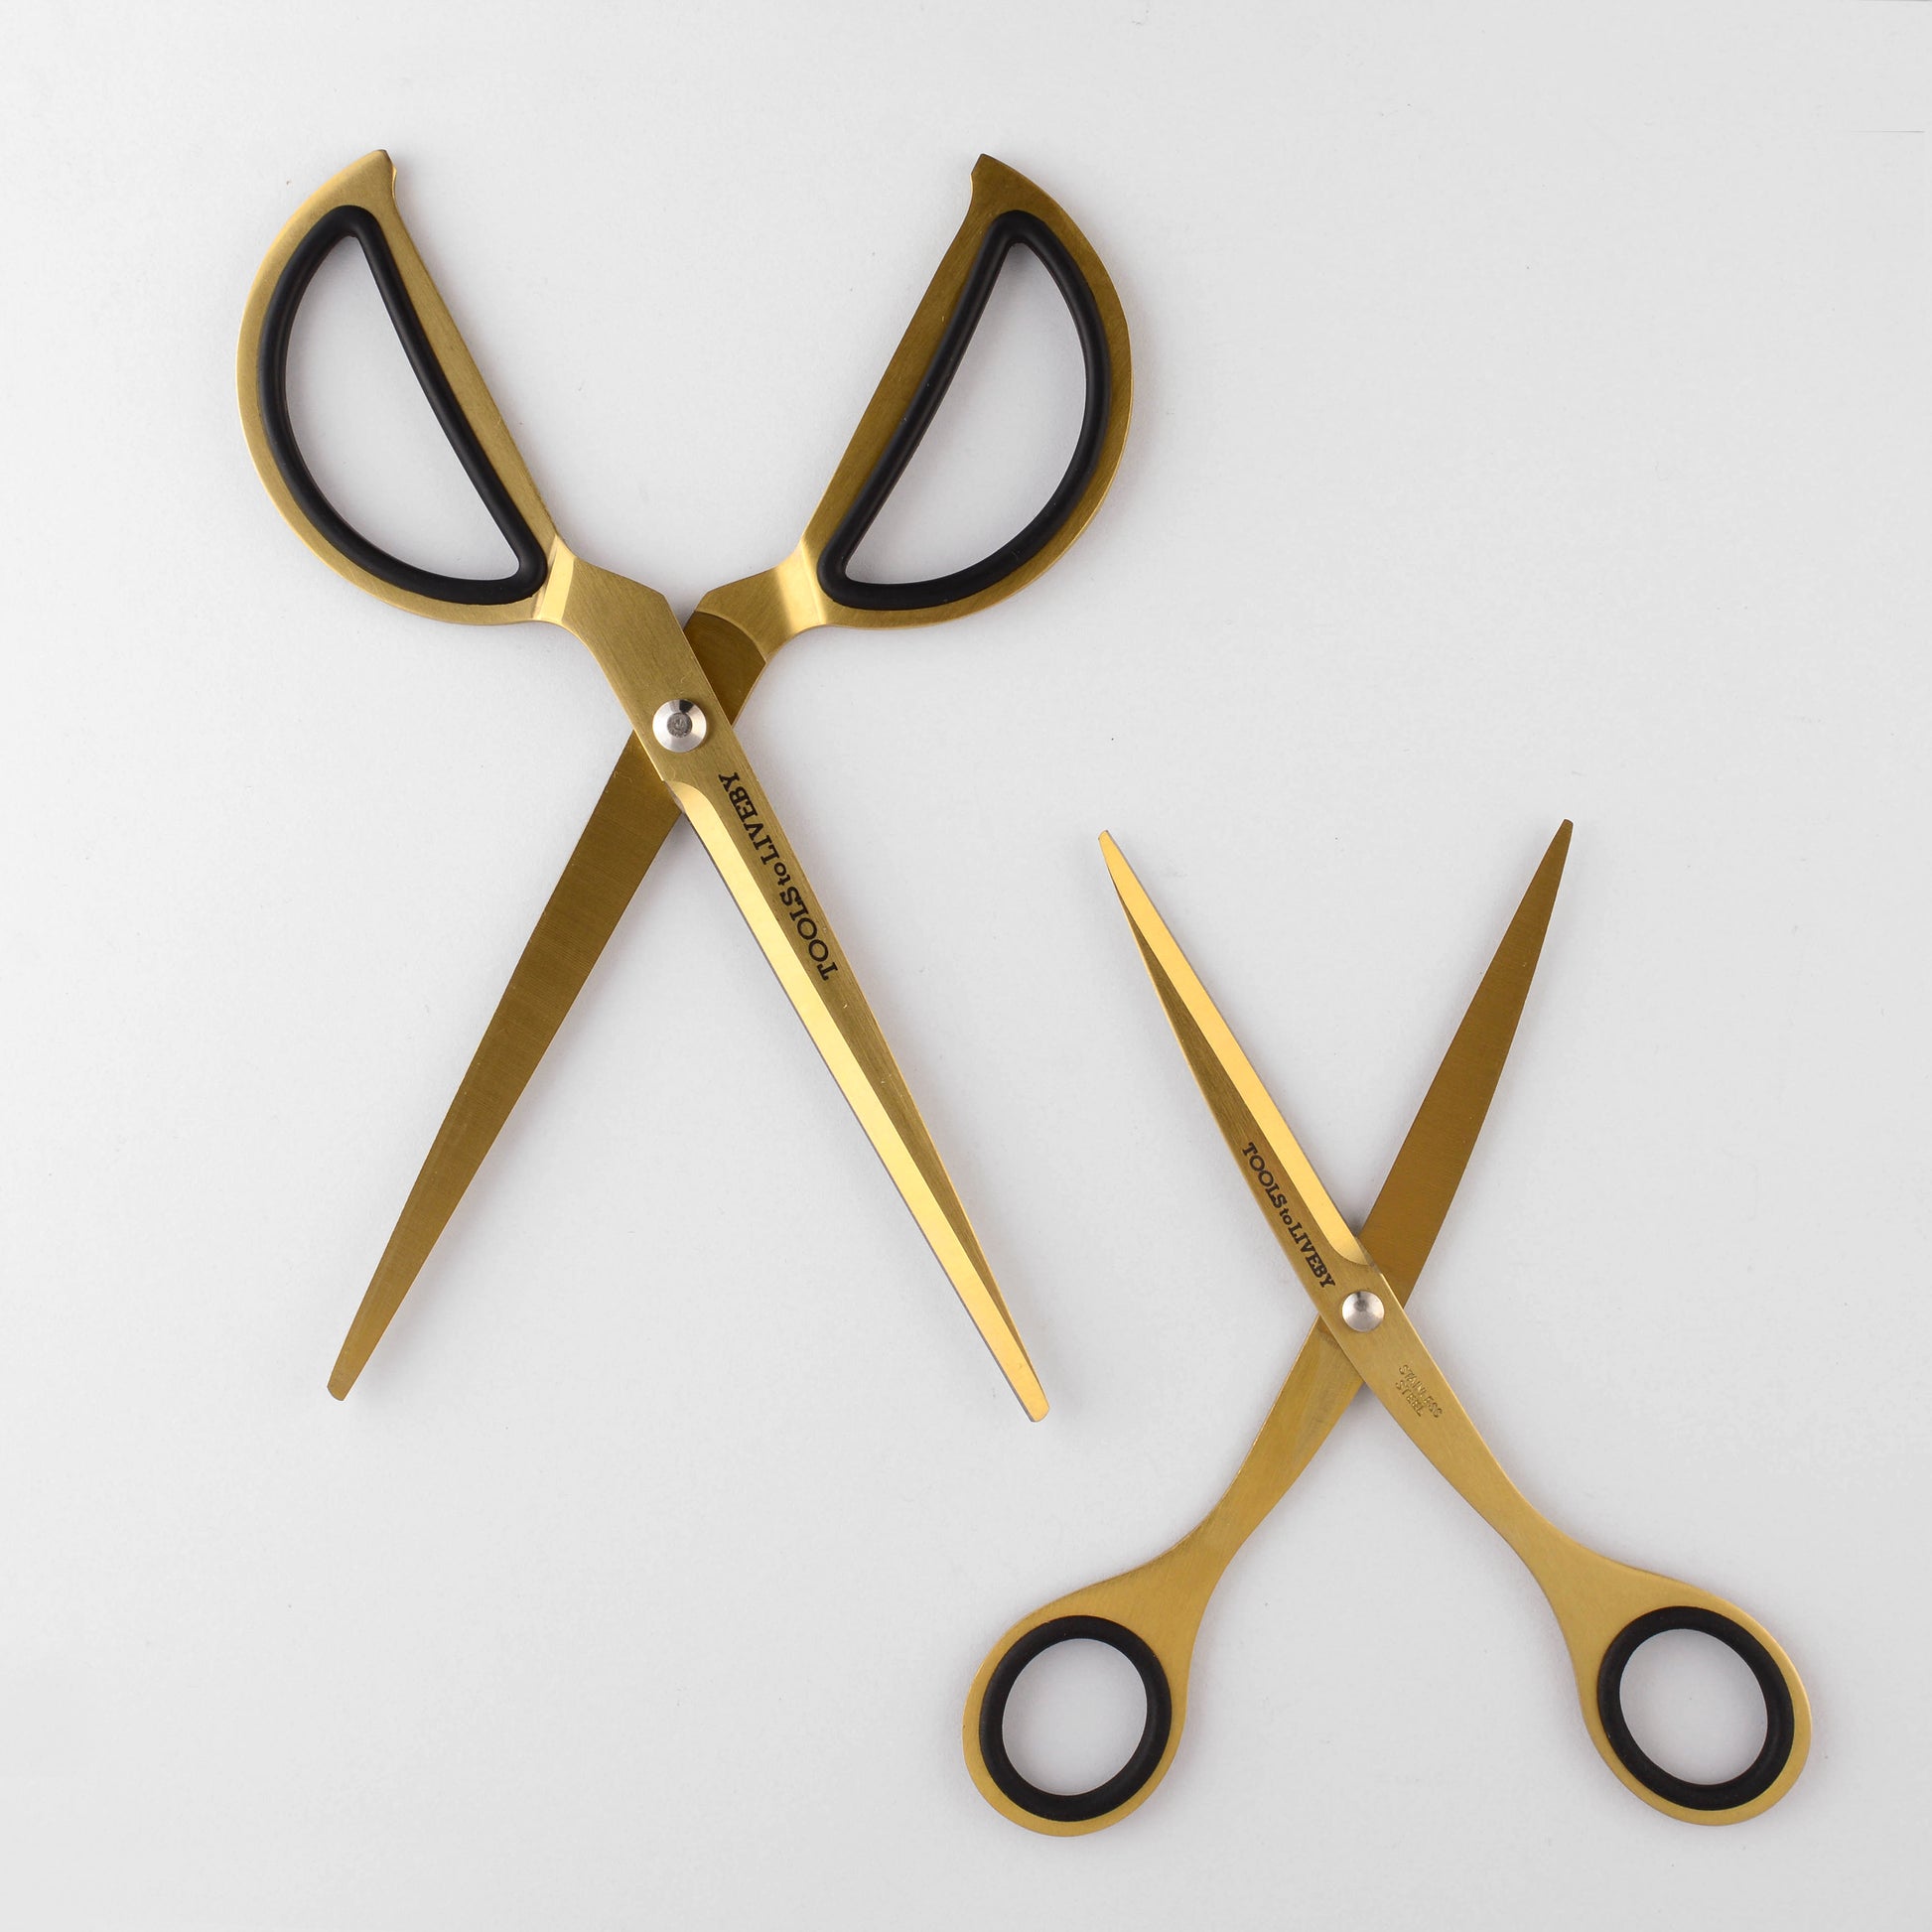 Tools to Liveby 3 Scissors - Gold